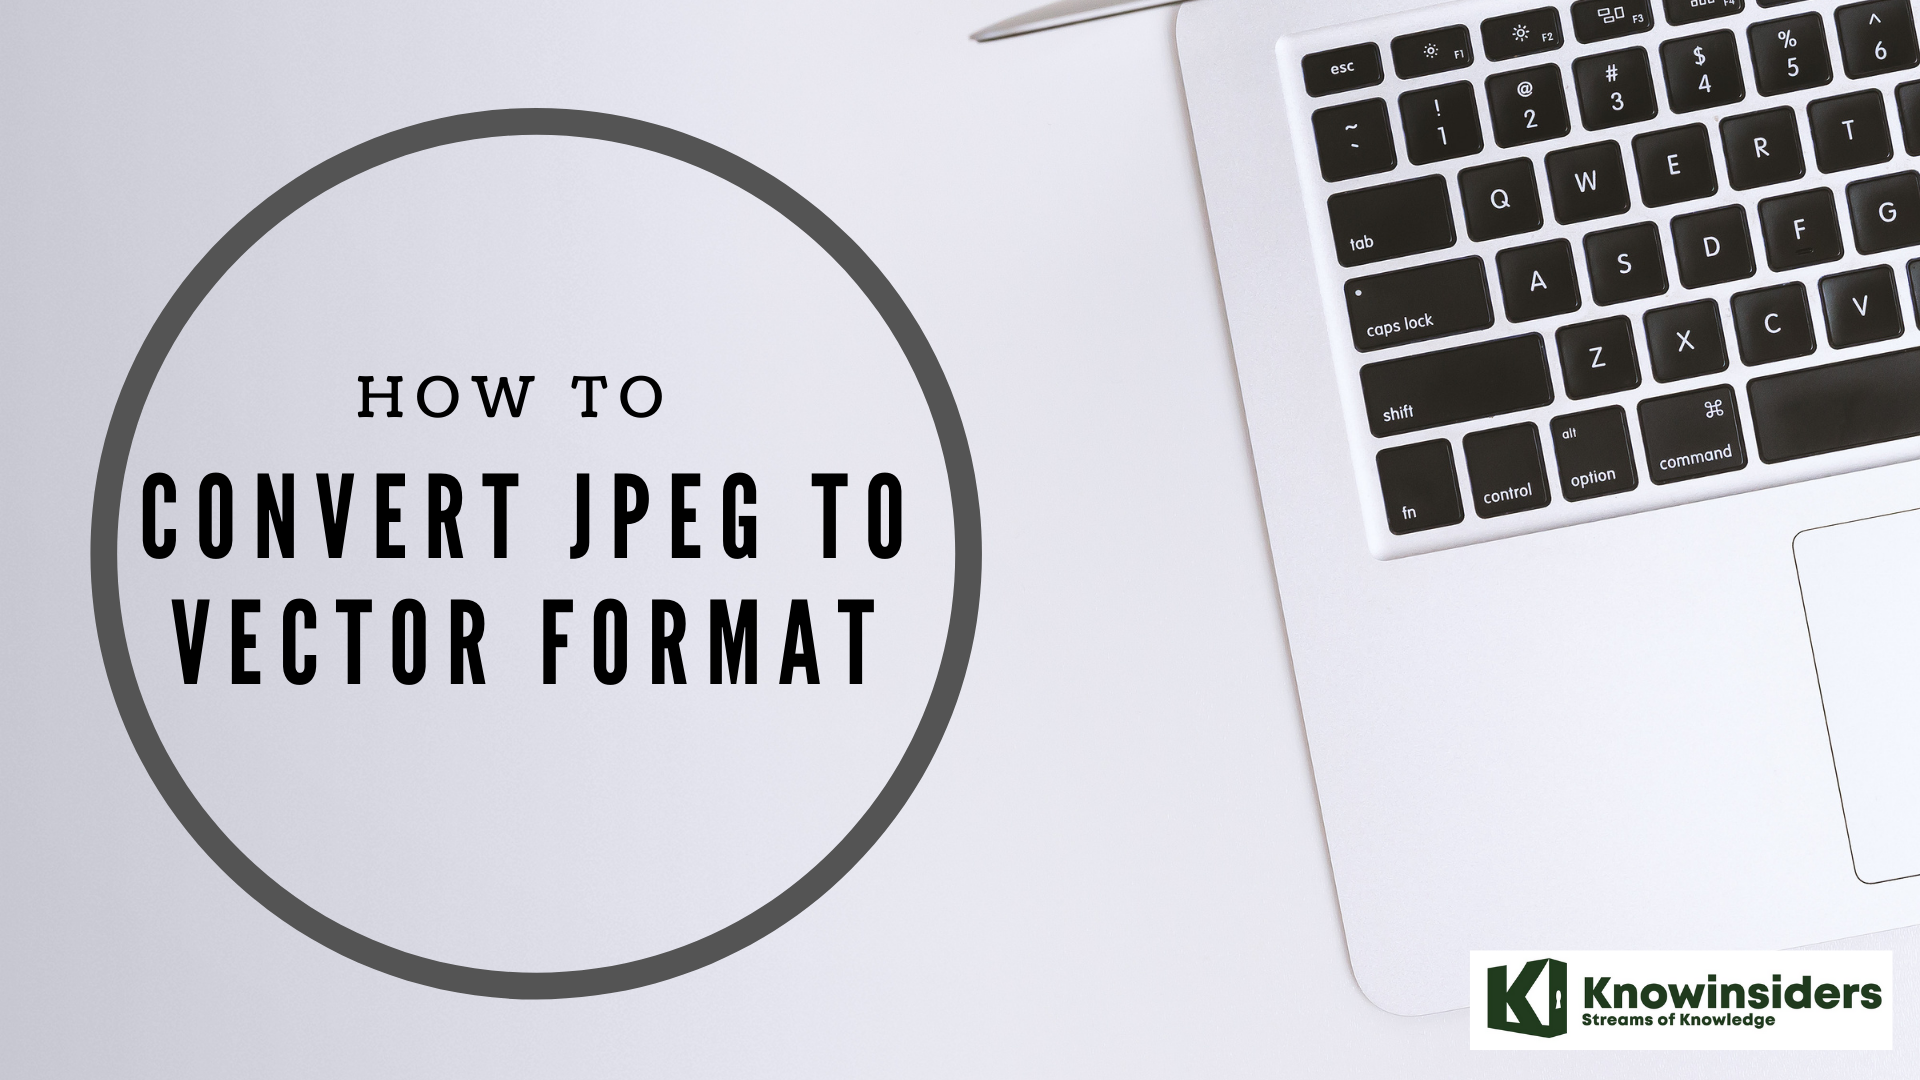 How To Convert JPEG To Vector: Step-By-Step Guide